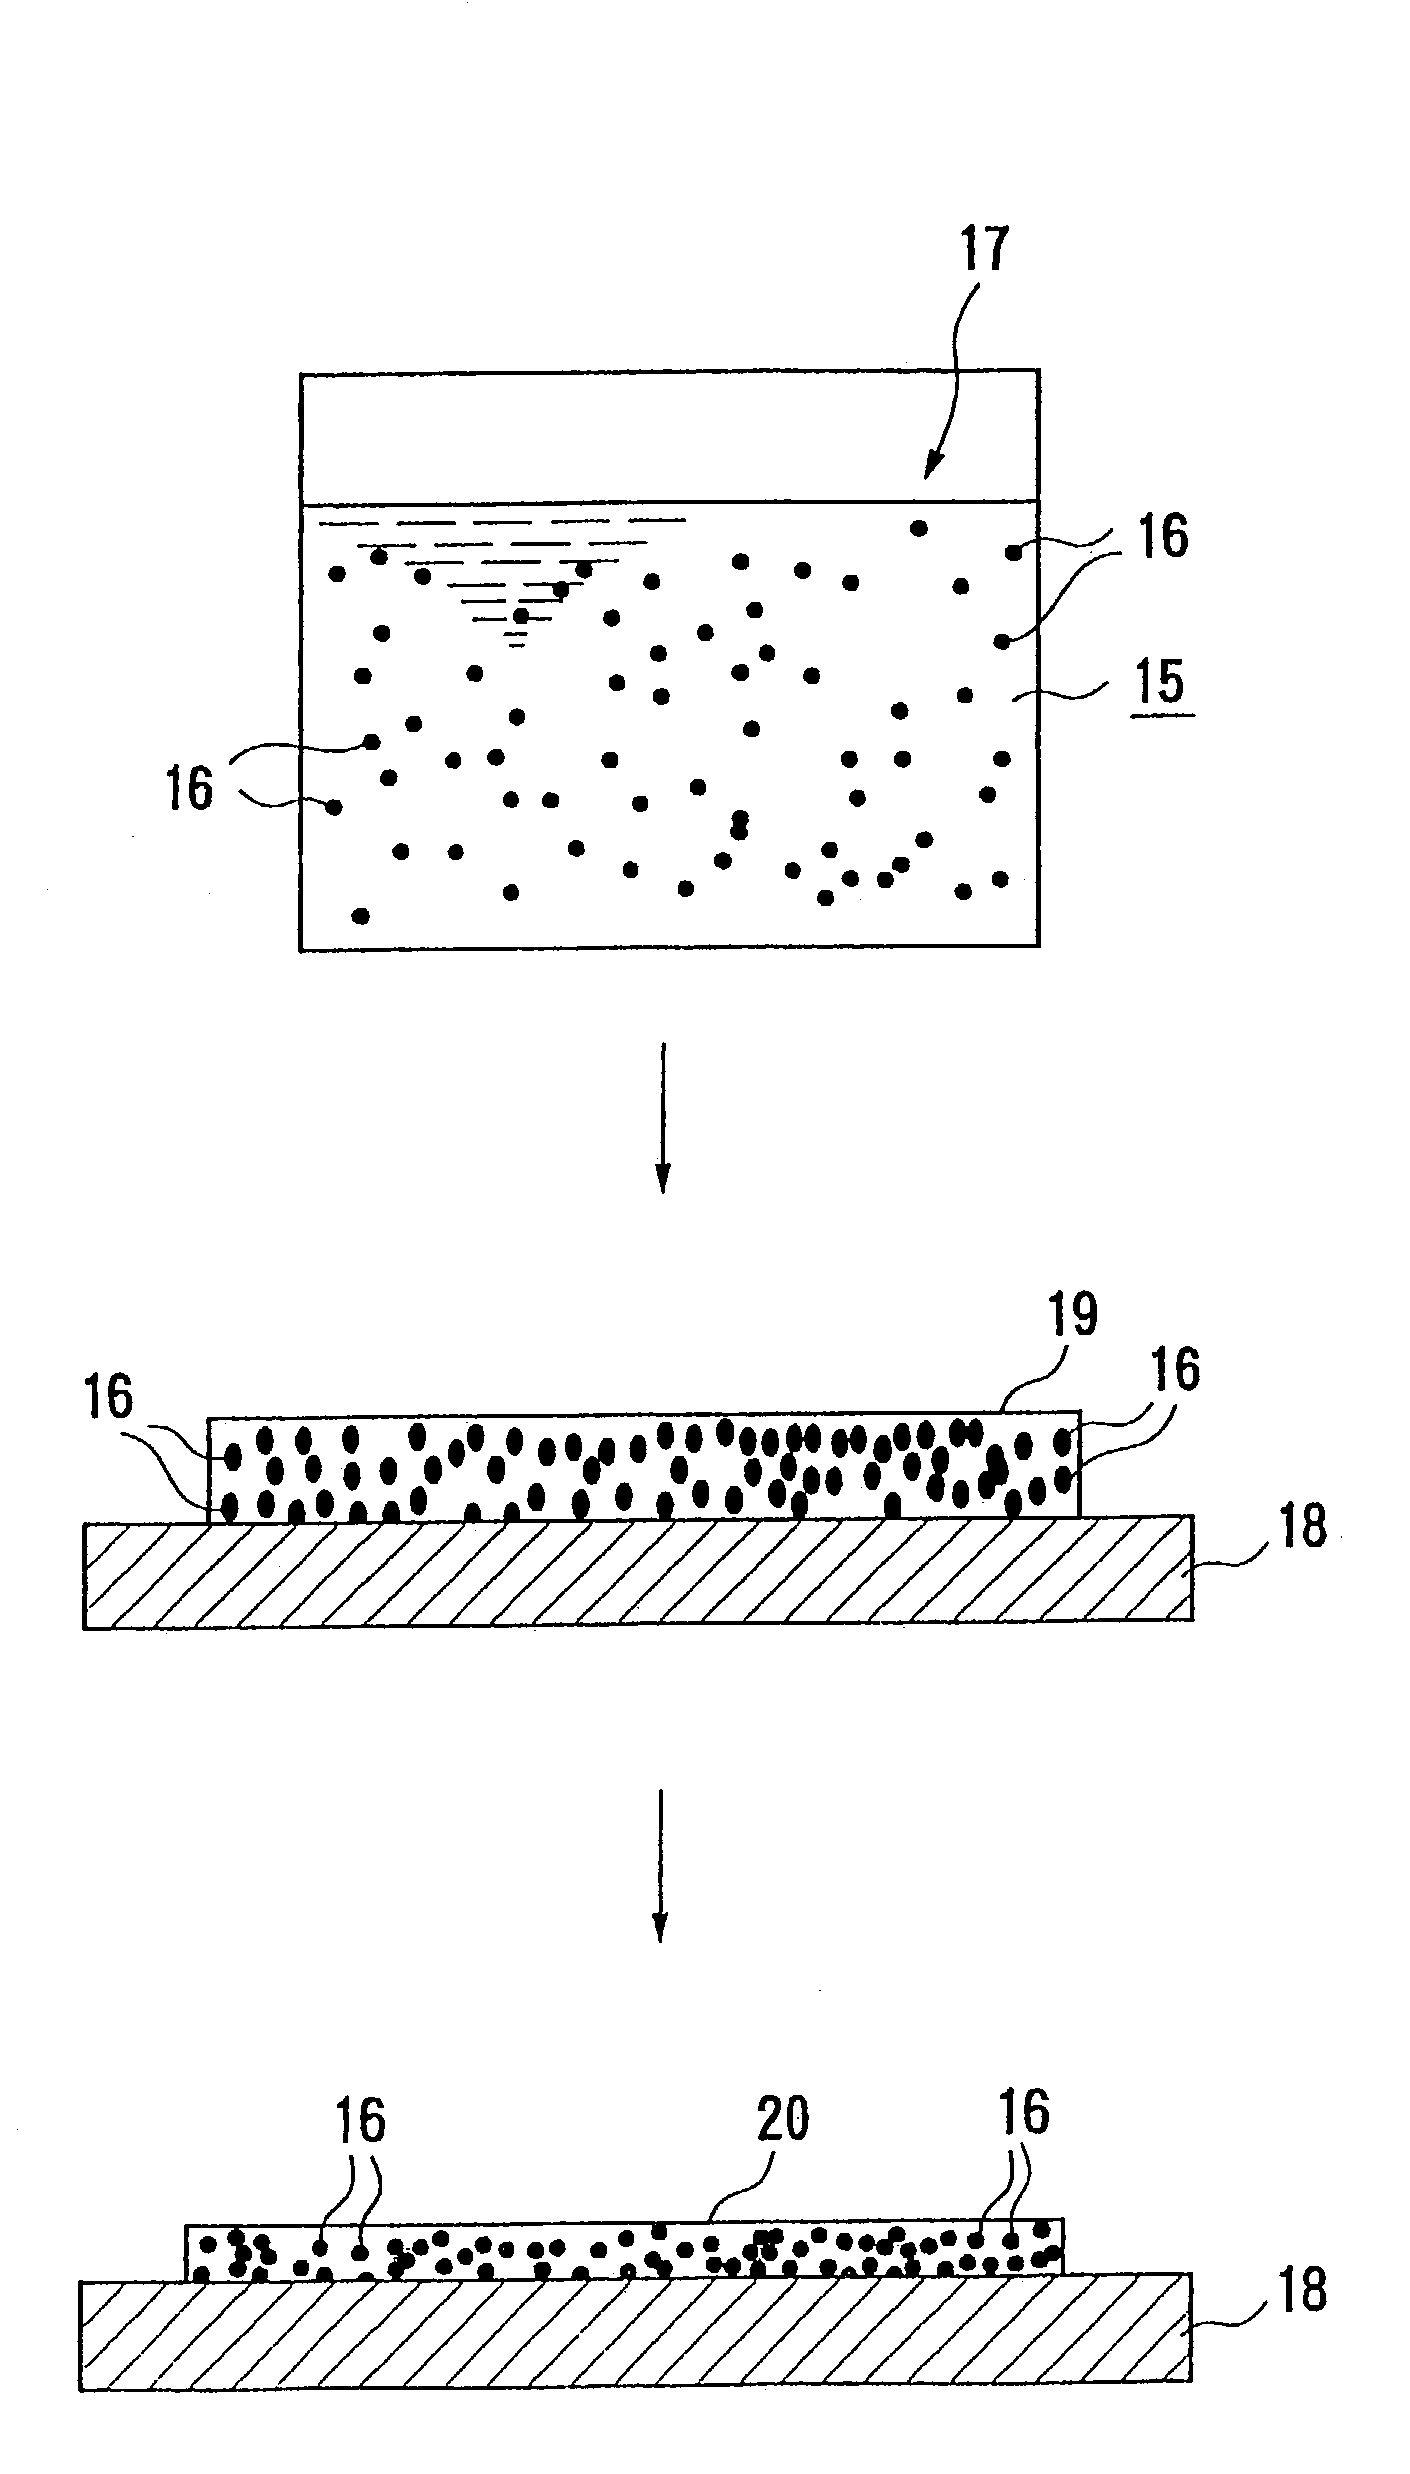 Method of forming thin metal films on substrates